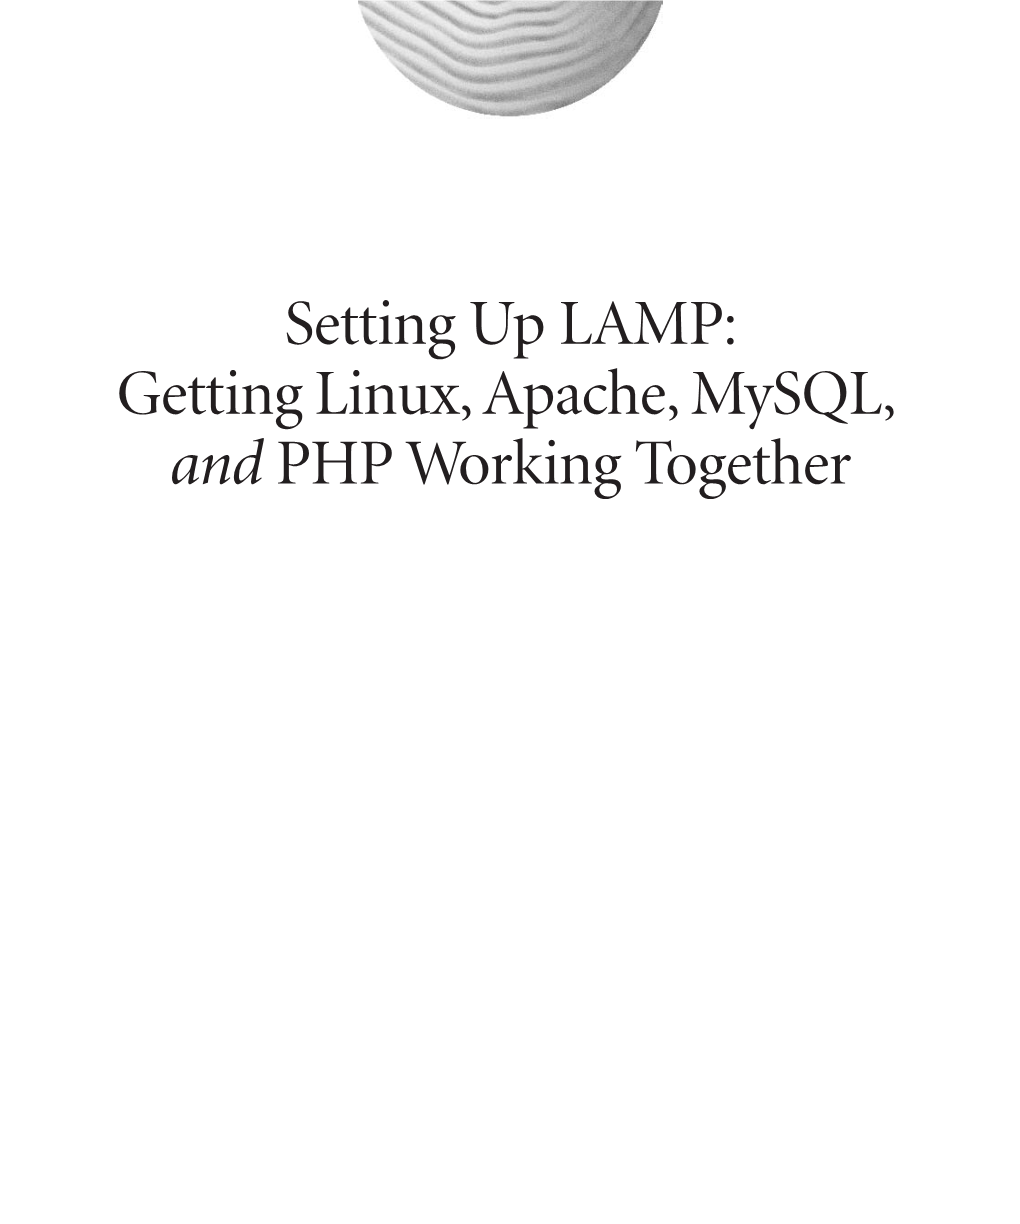 Setting up LAMP : Getting Linux, Apache, Mysql, and PHP Working Together